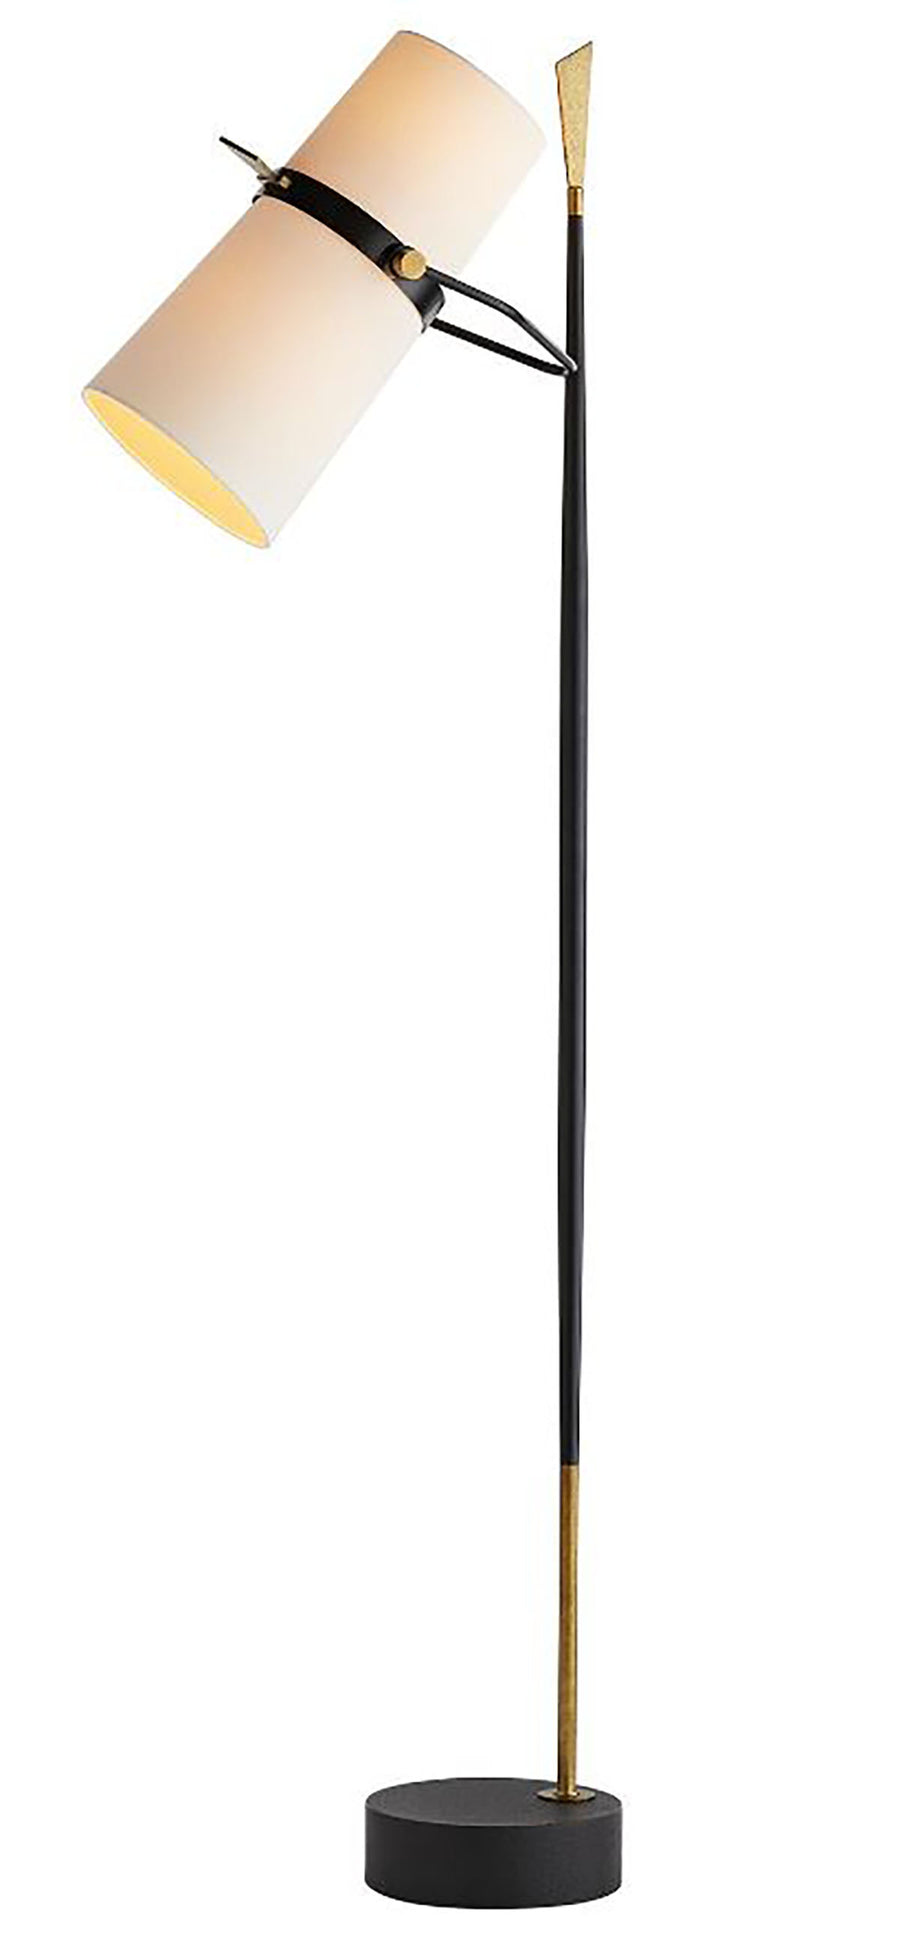 Yasmin Antique Iron modern Floor Lamp with a black iron tapered slender vertical rod and a blade shaped vintage brass finish finial.